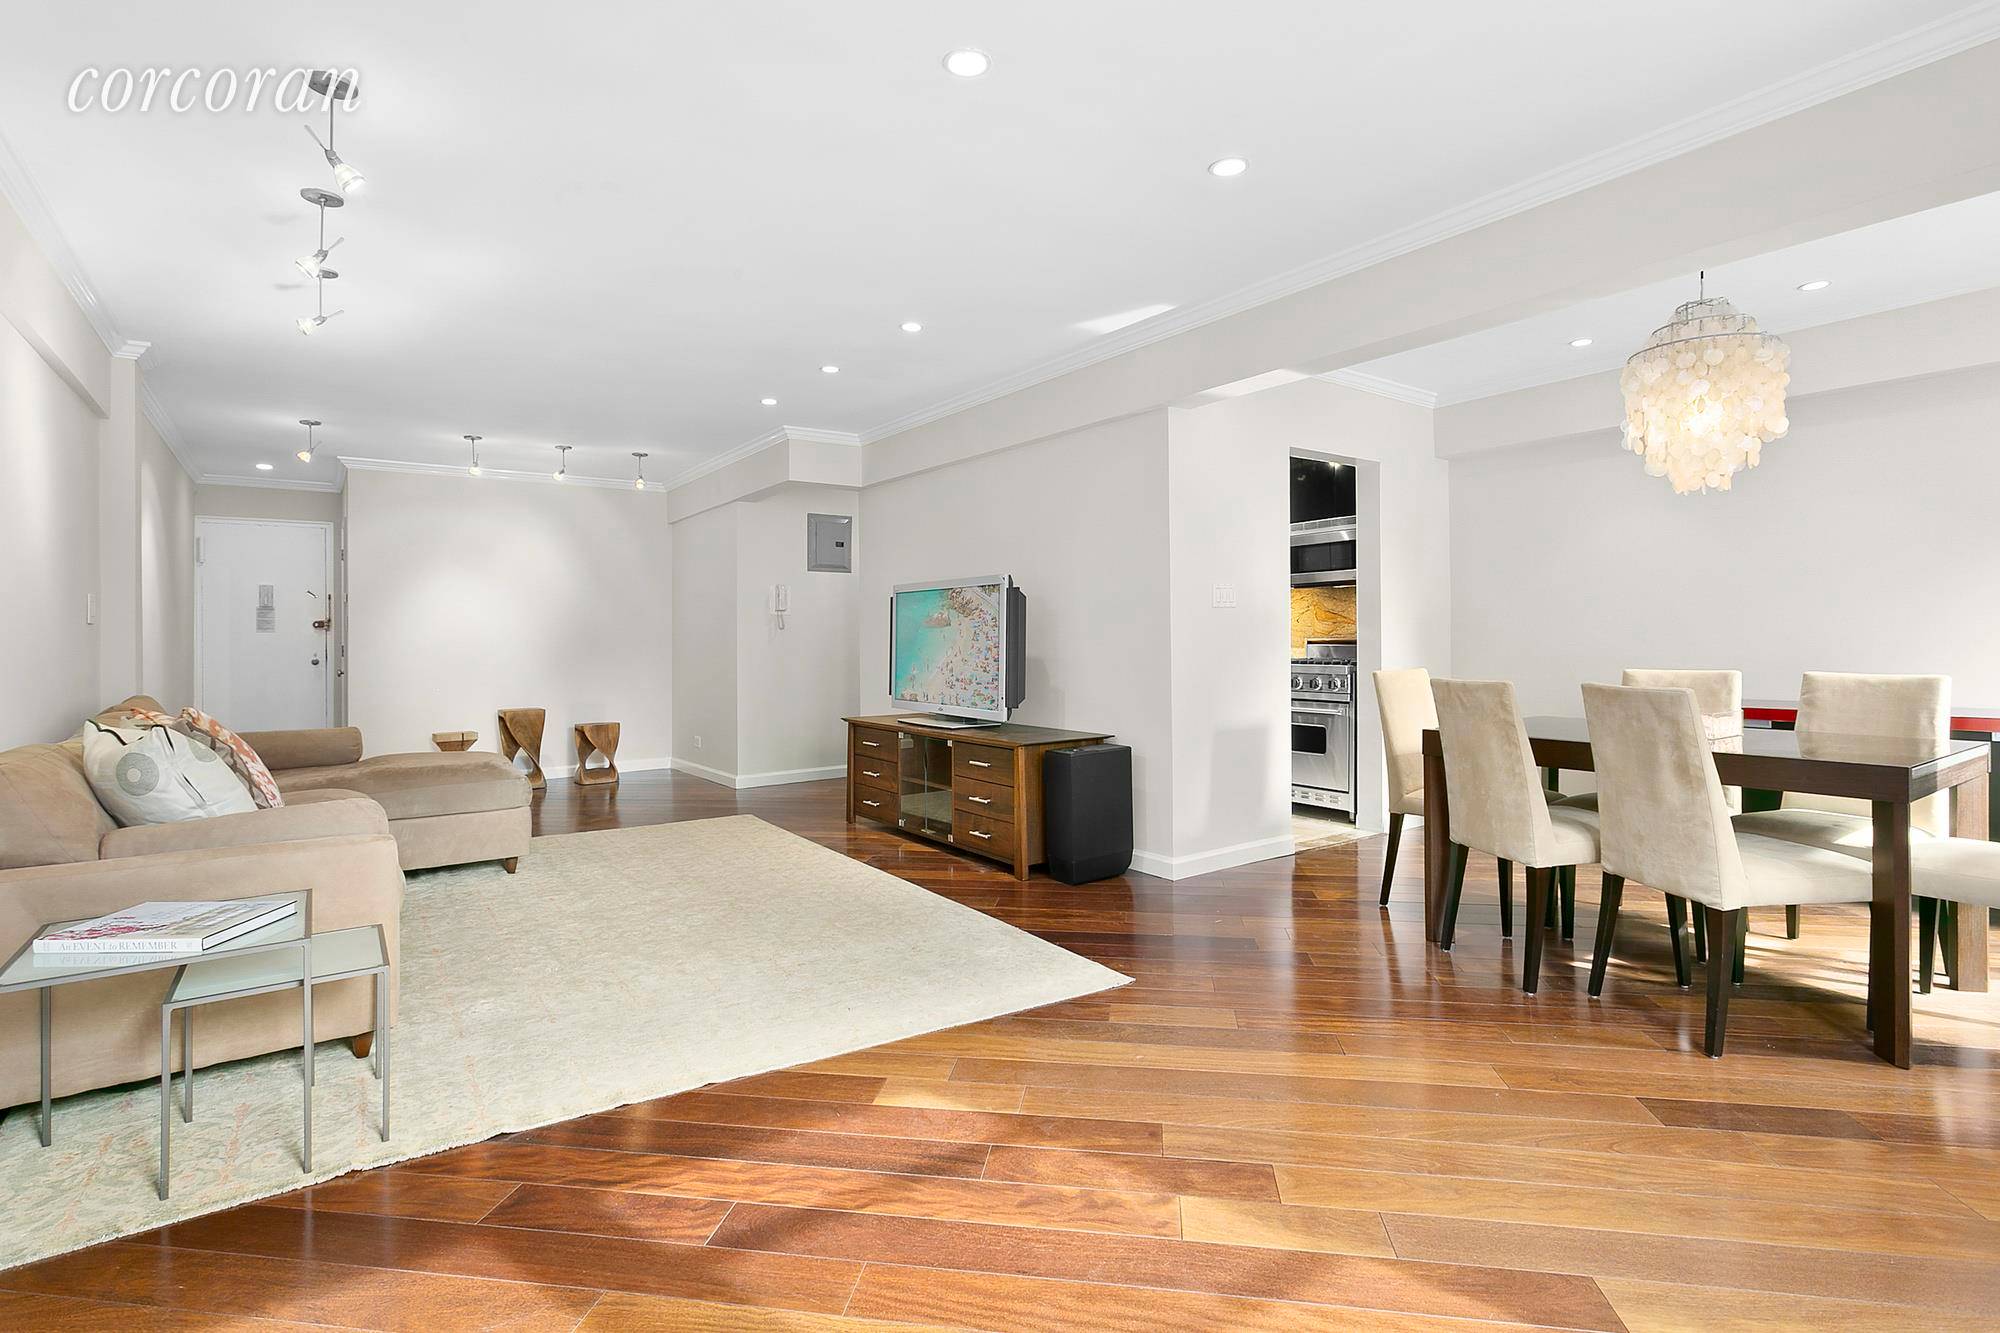 Move In Ready ! Sunny 2 bedroom, 2 bathroom convertible 3 bedroom home at The Lafayette on Greenwich Village's Gold Coast.